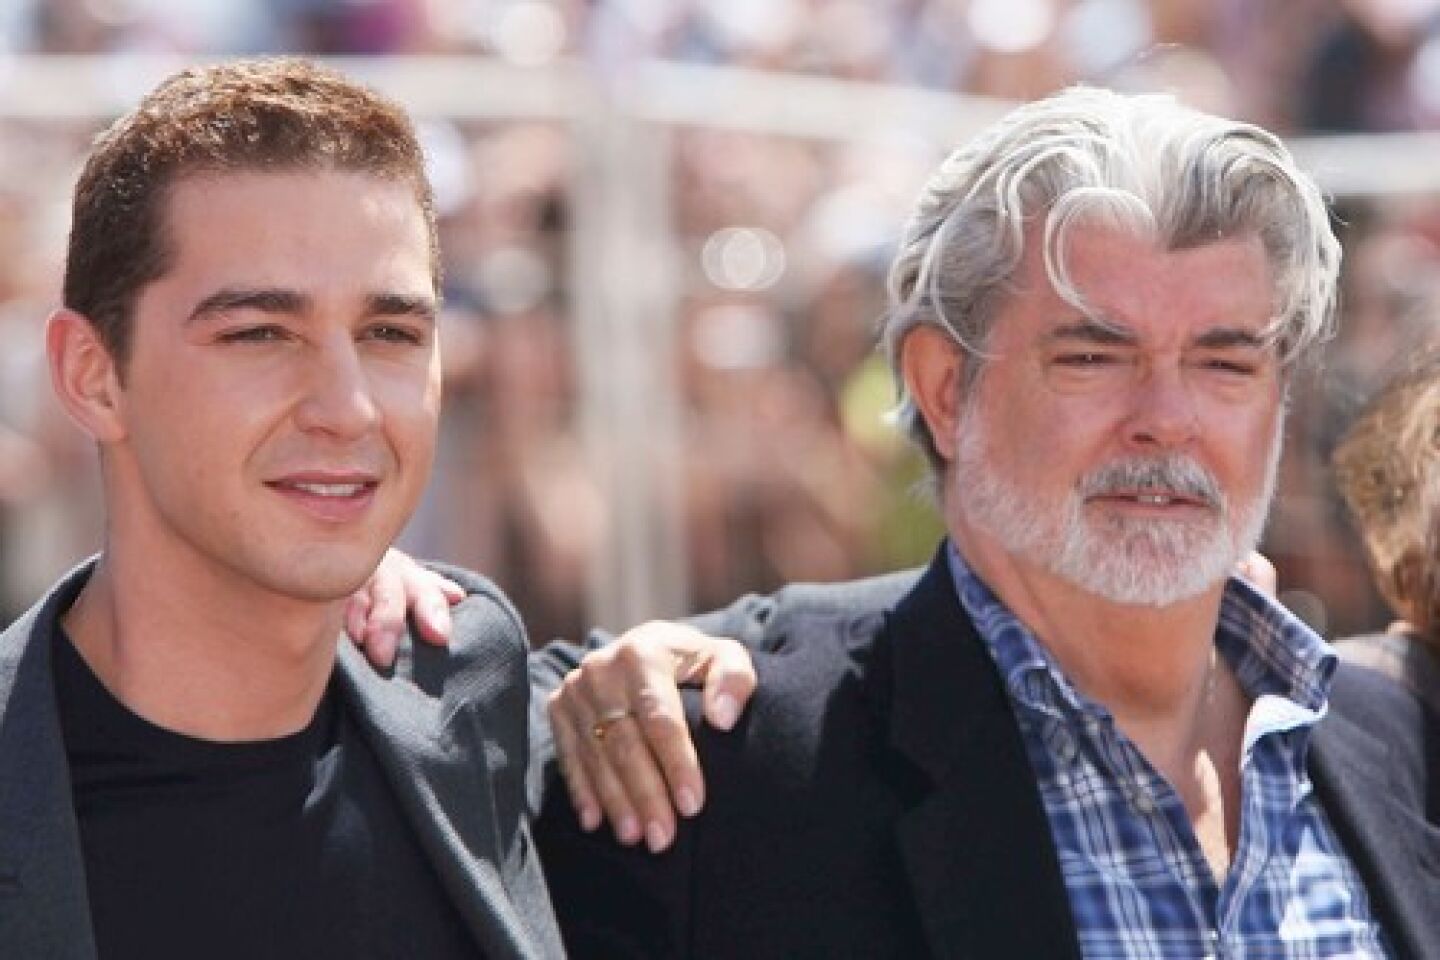 Shia LaBeouf and George Lucas at the Cannes premiere of "Indiana Jones and the Kingdom of the Crystal Skull."